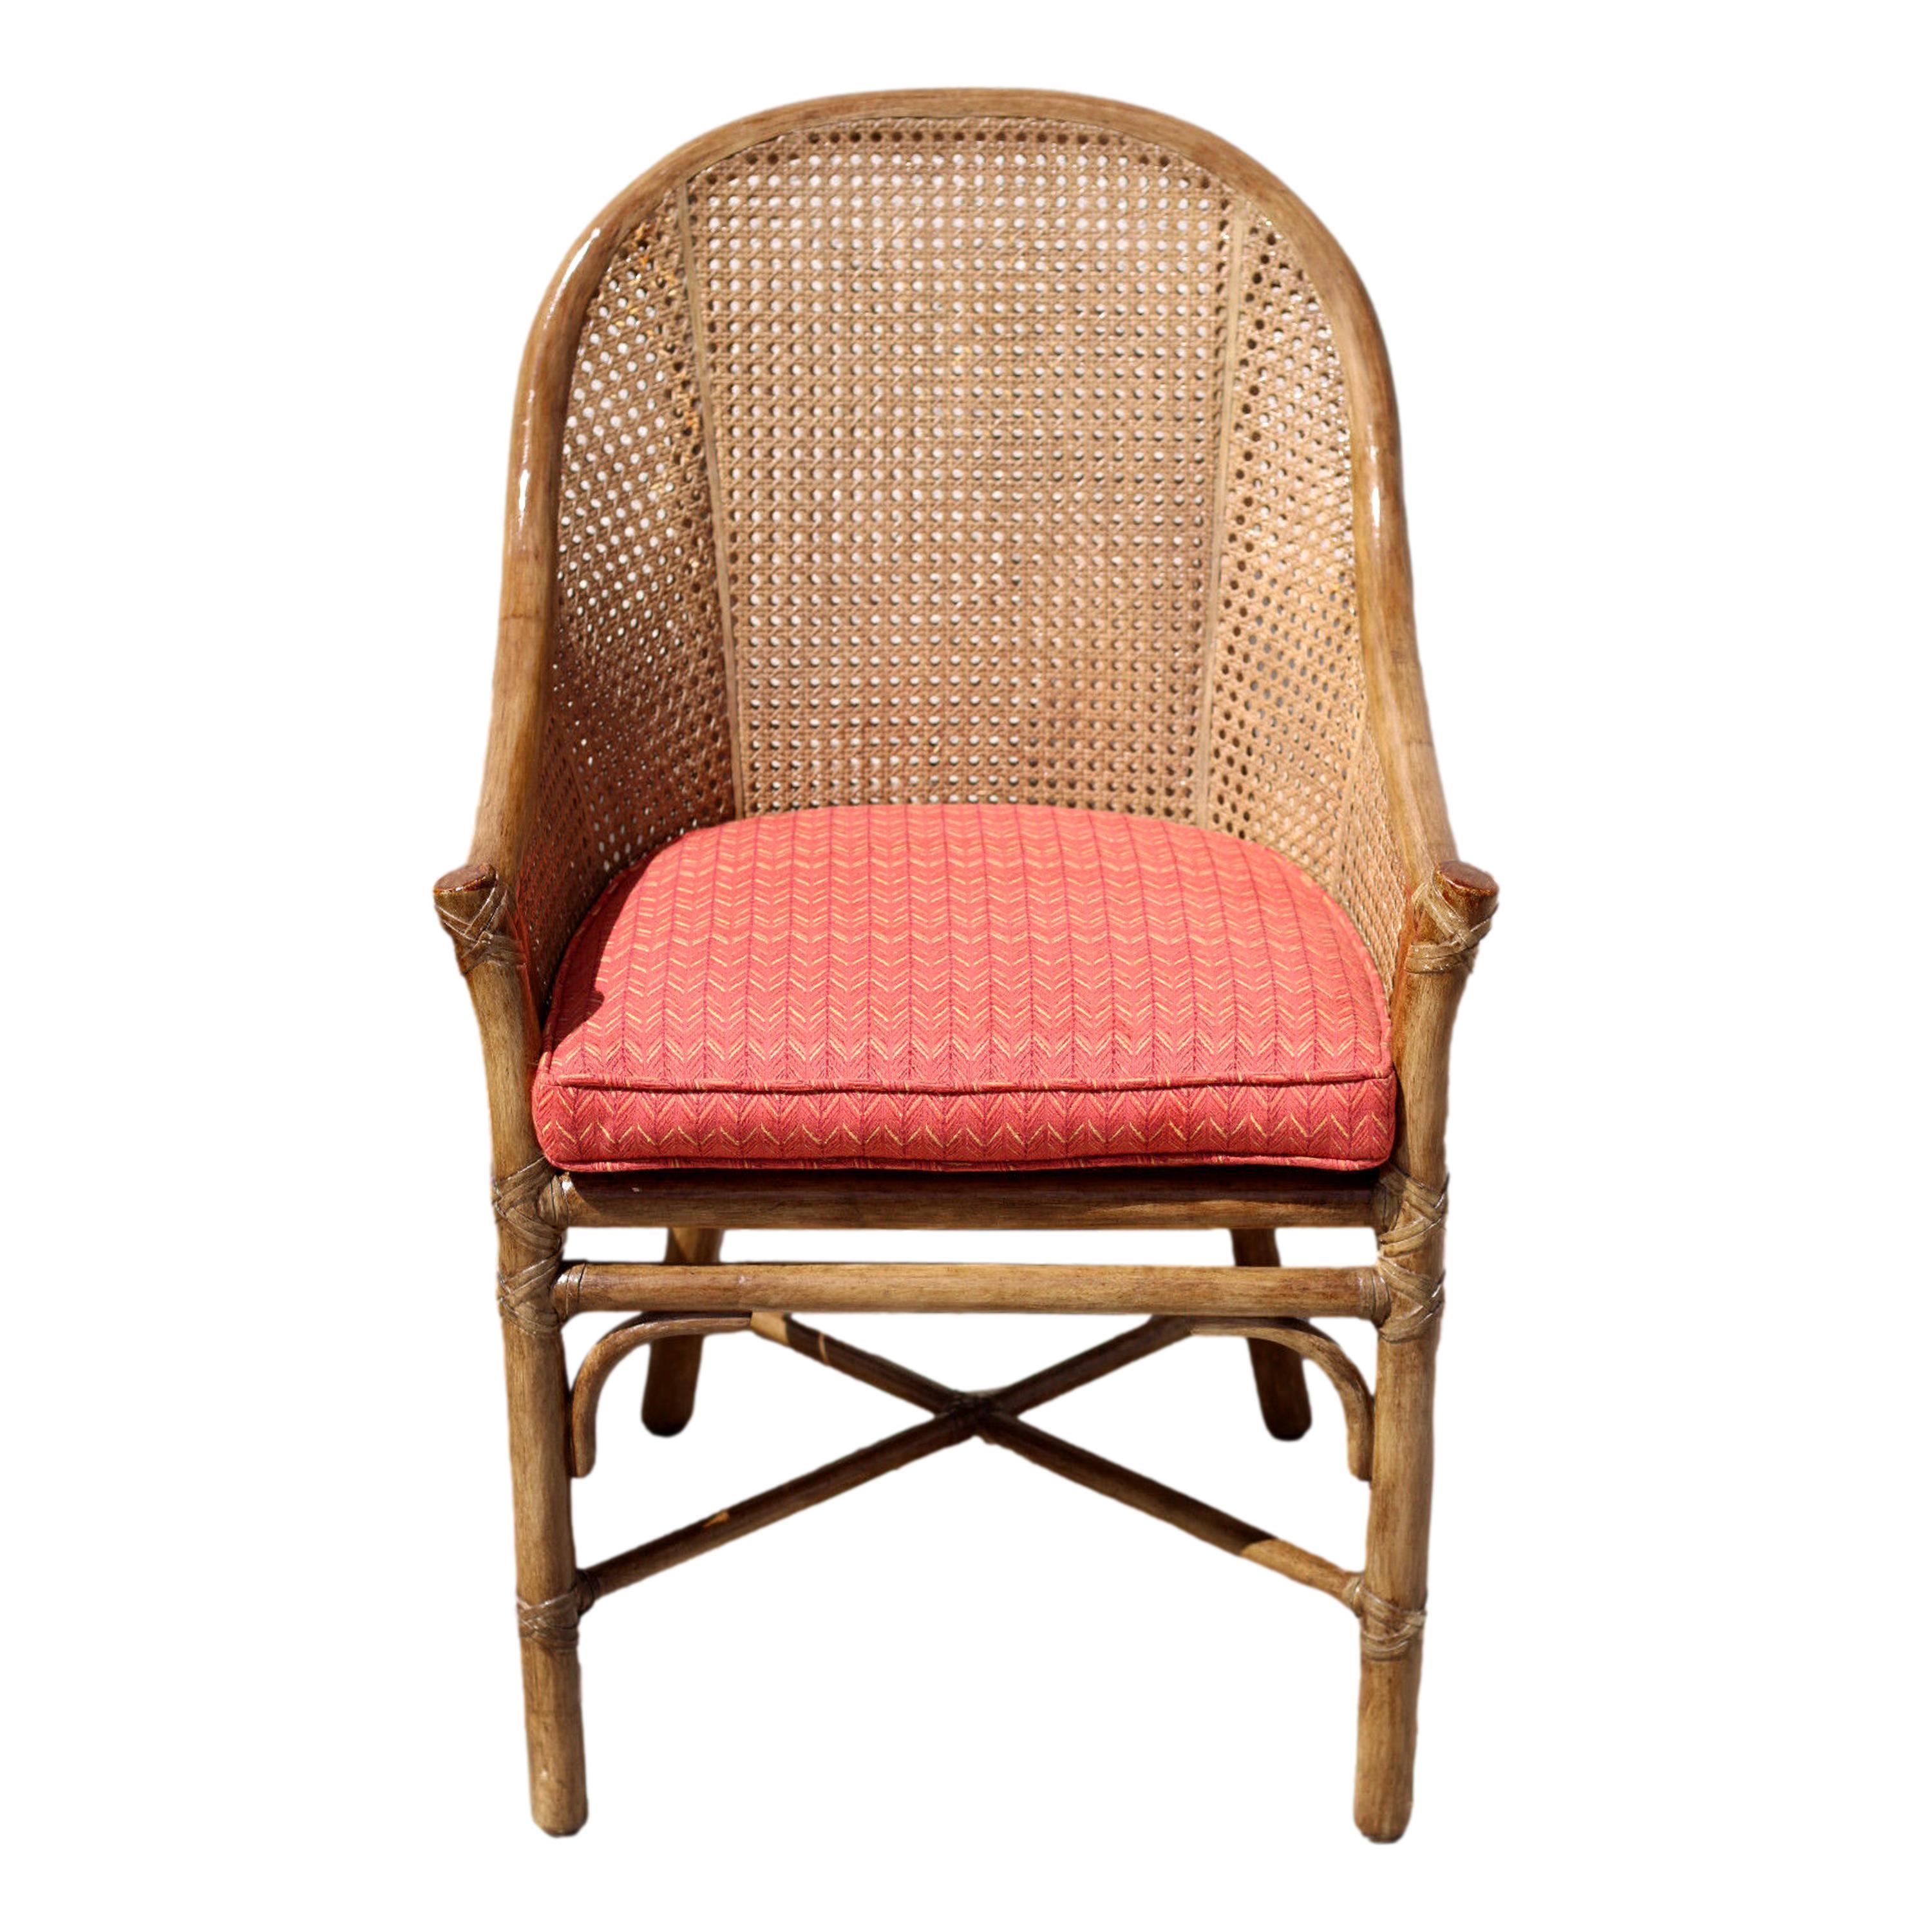 A pair of rattan caned barrel back dining armchairs designed by breakthrough innovator Elinor McGuire. Casual luxury from McGuire San Francisco. Vintage organic modern chairs designed in the classic tradition using beautiful materials simply and